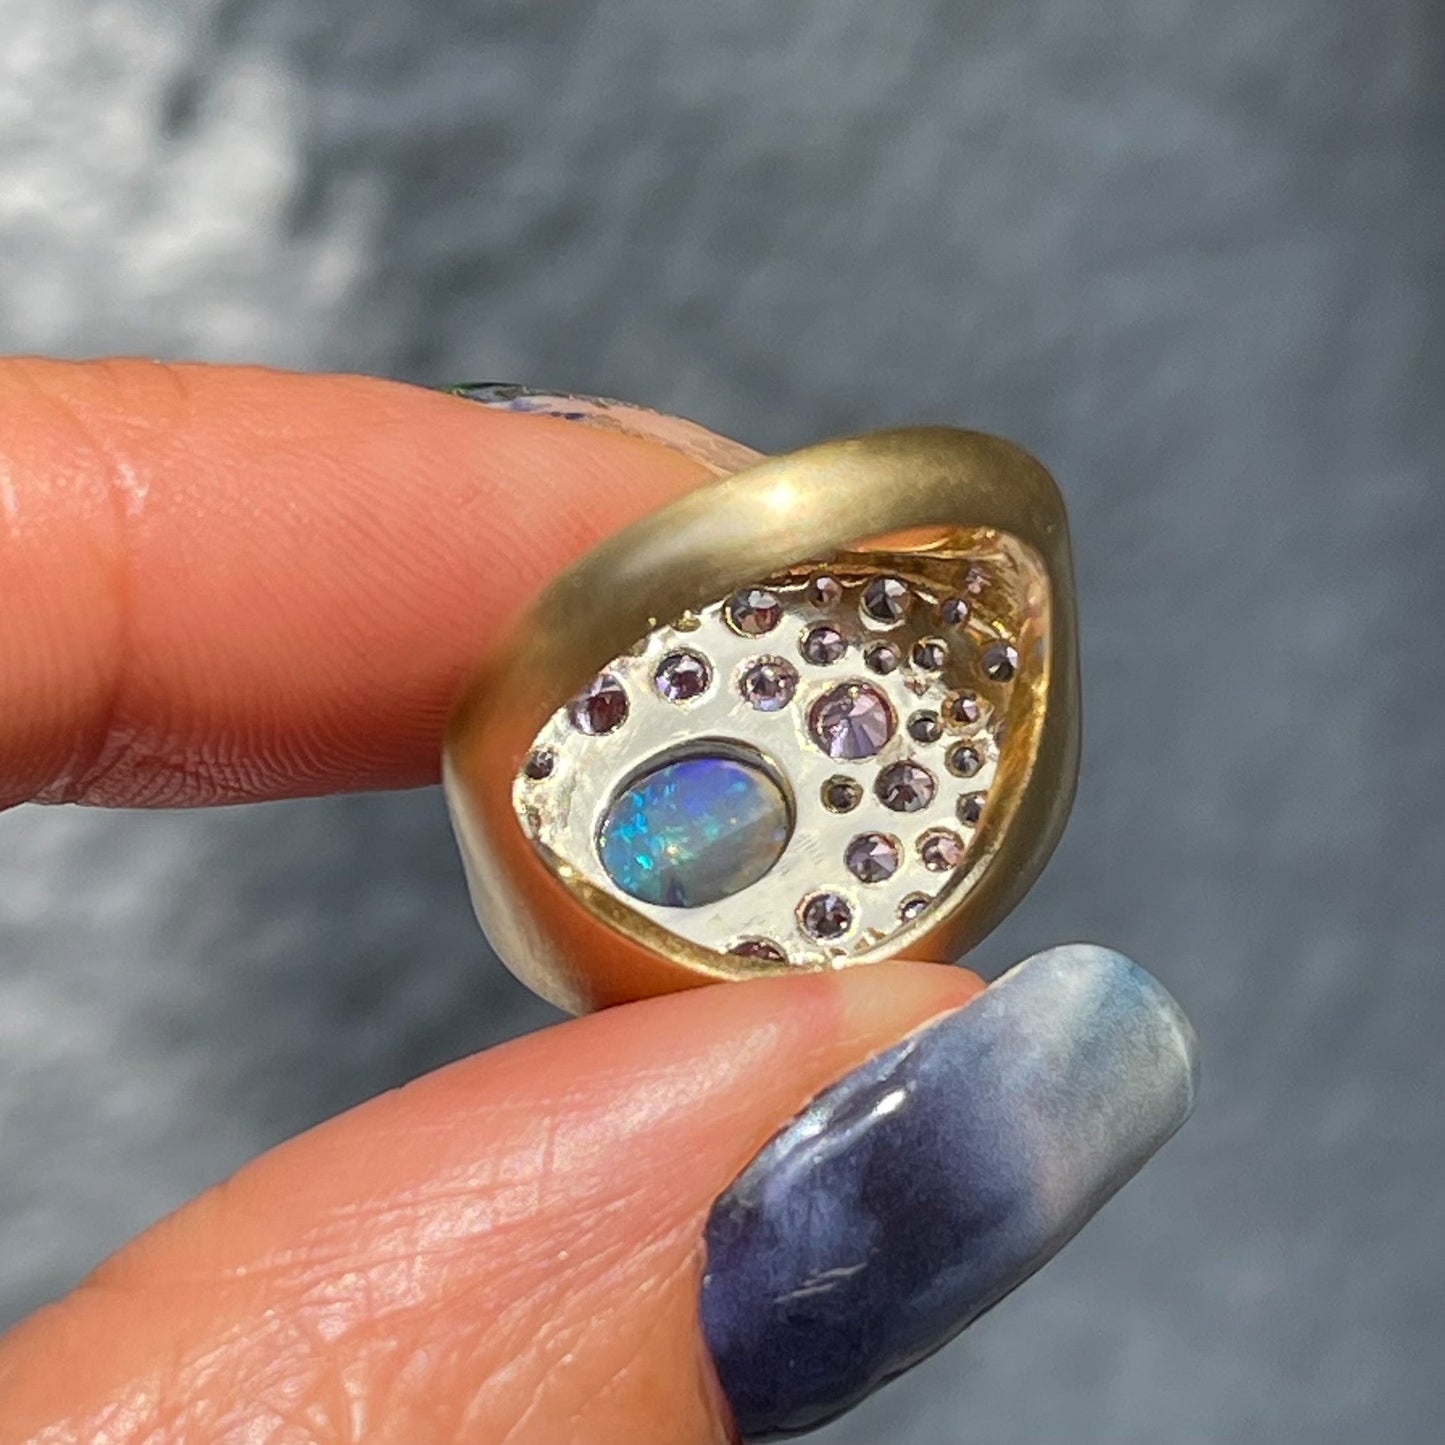 An Australian Opal Ring by NIXIN Jewelry held upside down to show the view of the stone settings from underneath. Exposed culets allows light to travel through the sapphires.